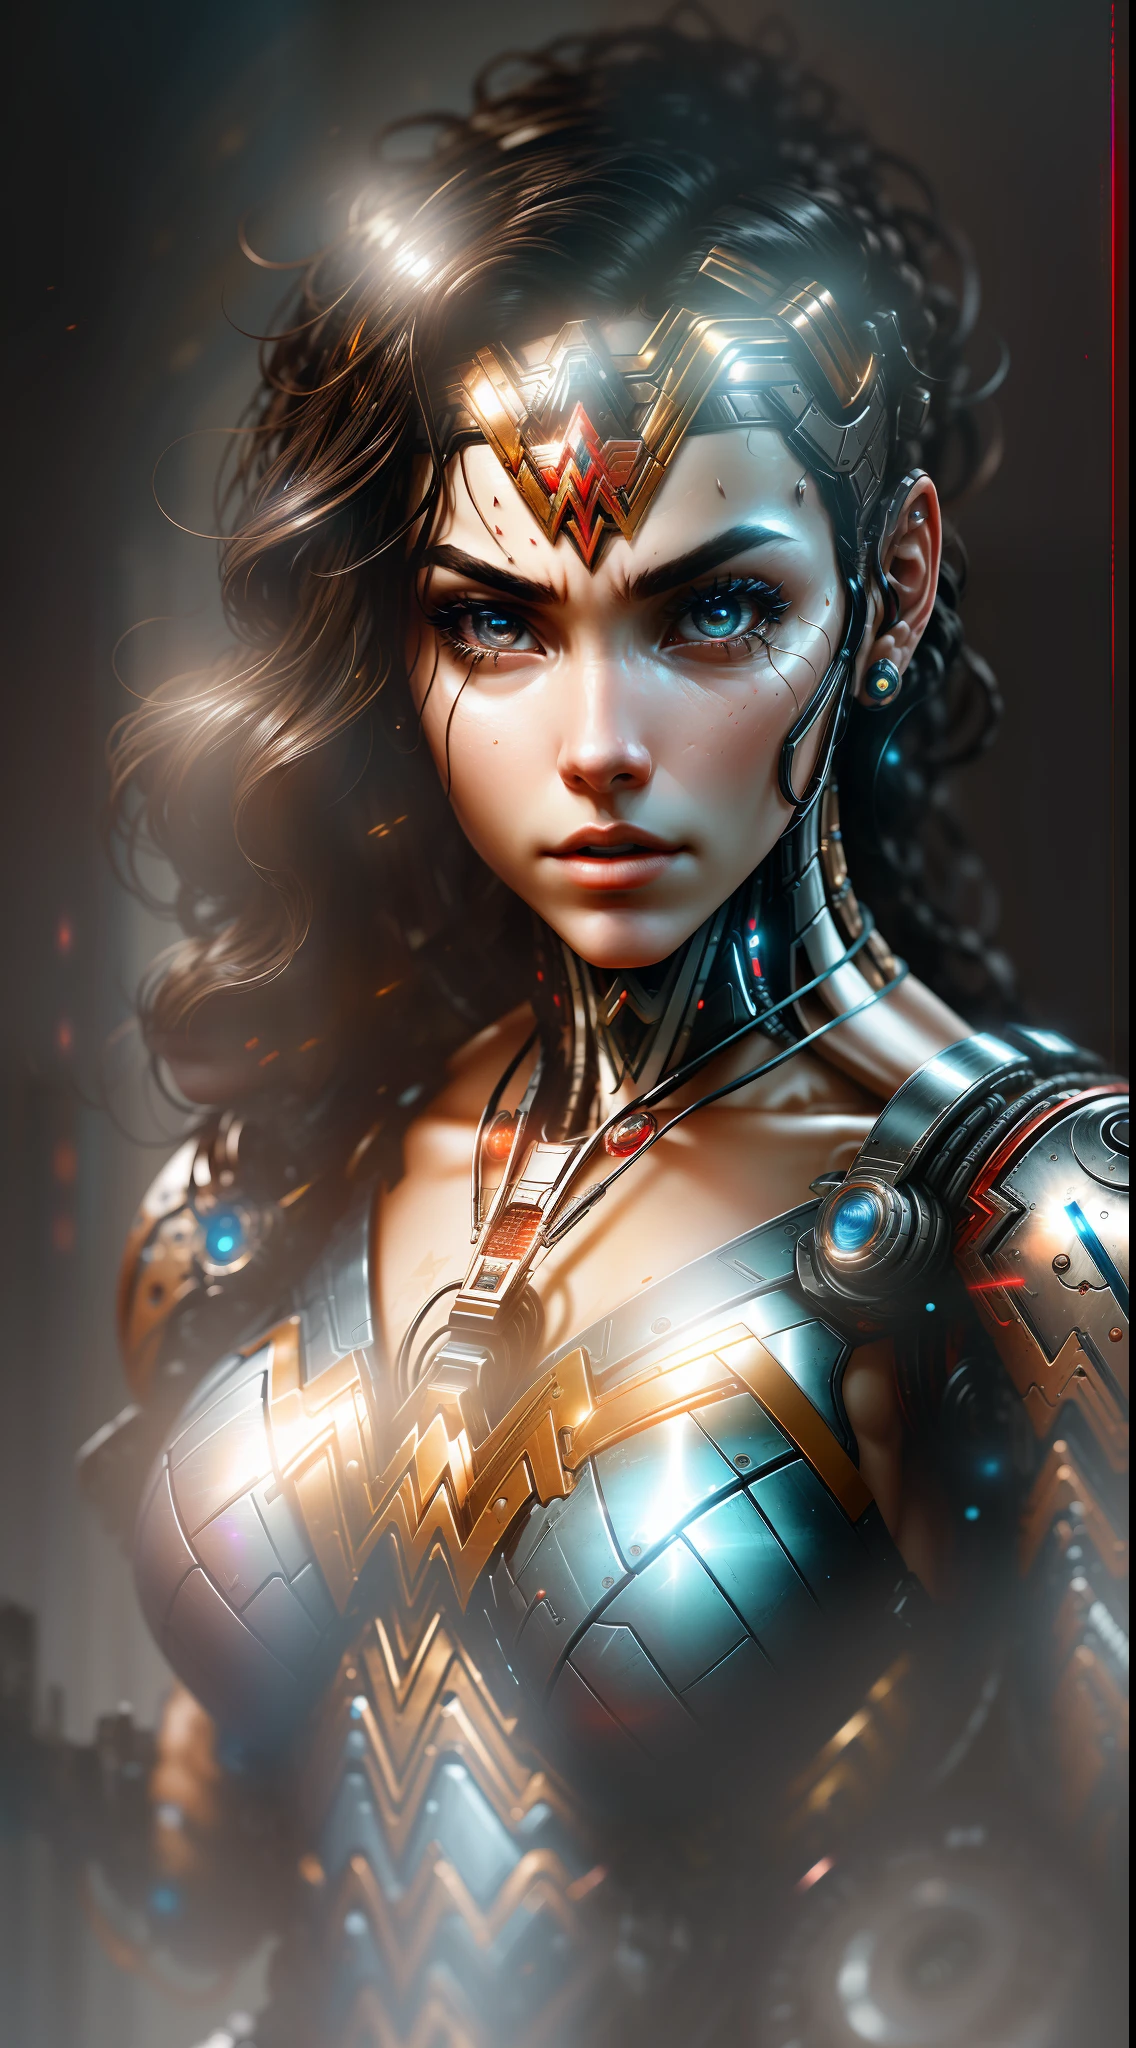 Wonder Woman from DC photography, biomechanical, complex robot, full height, hyper-realistic, insane small details, extremely clean lines, cyberpunk aesthetic, a masterpiece featured on Zbrush Central